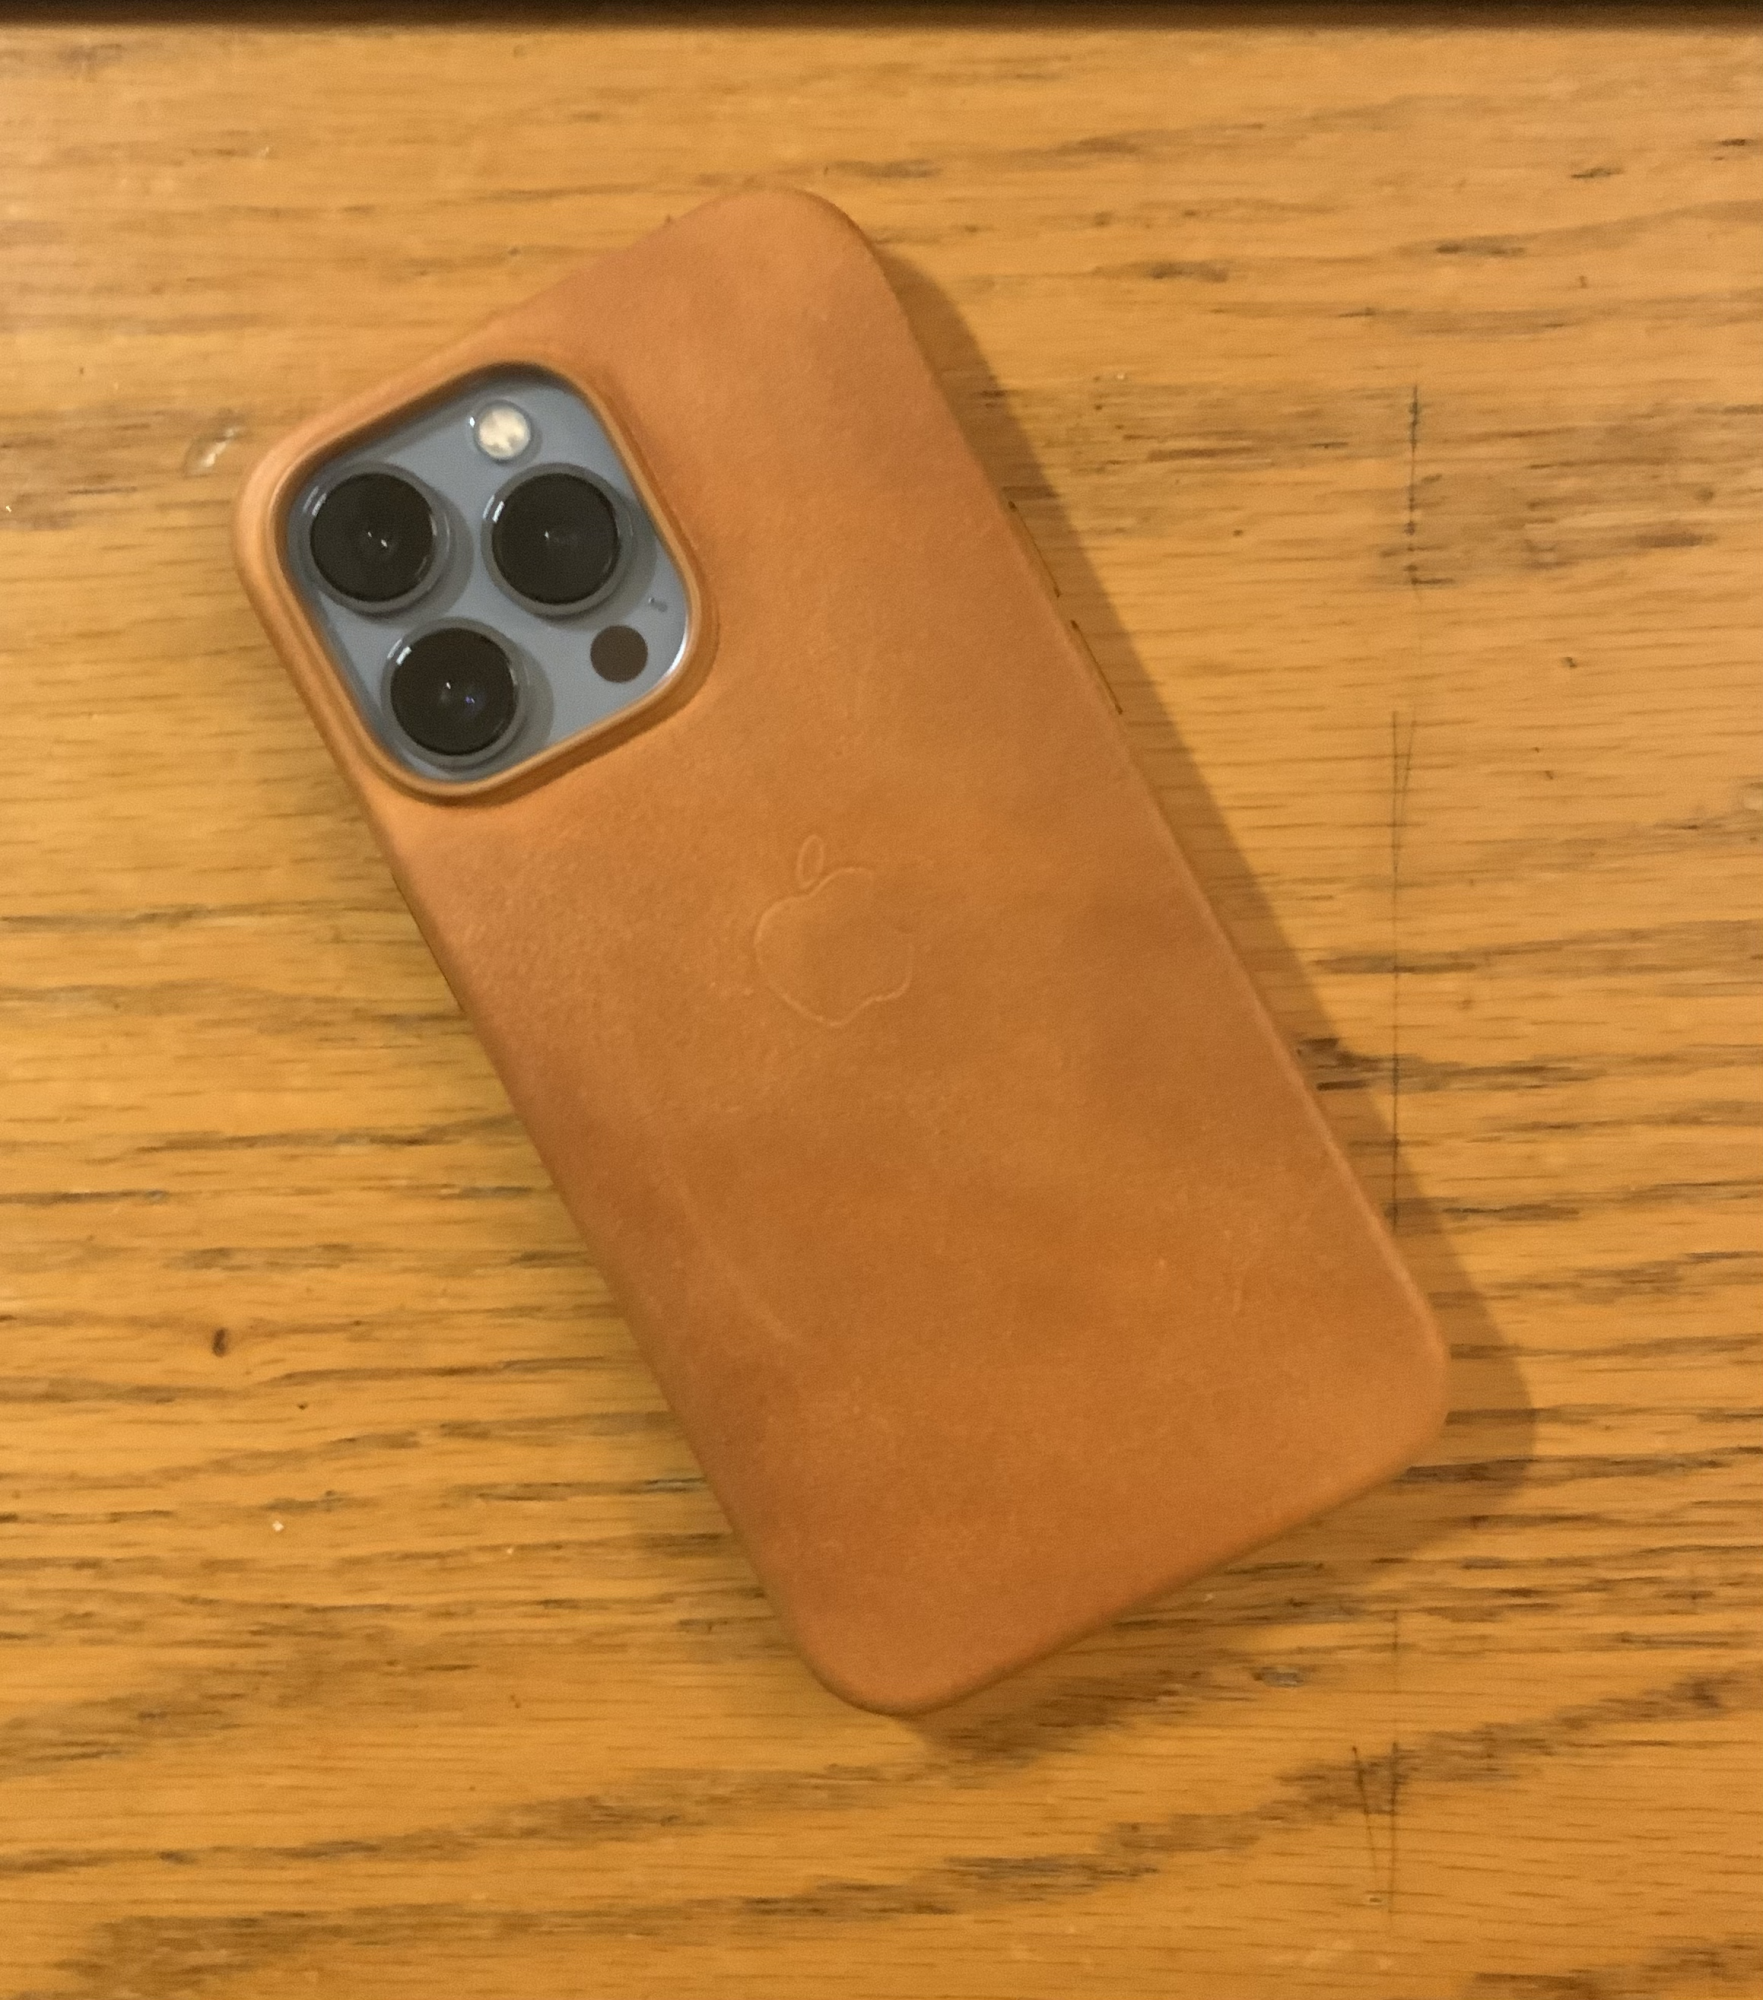 Golden Brown Leather iPhone 13 PM Case Patina. : r/iPhone13